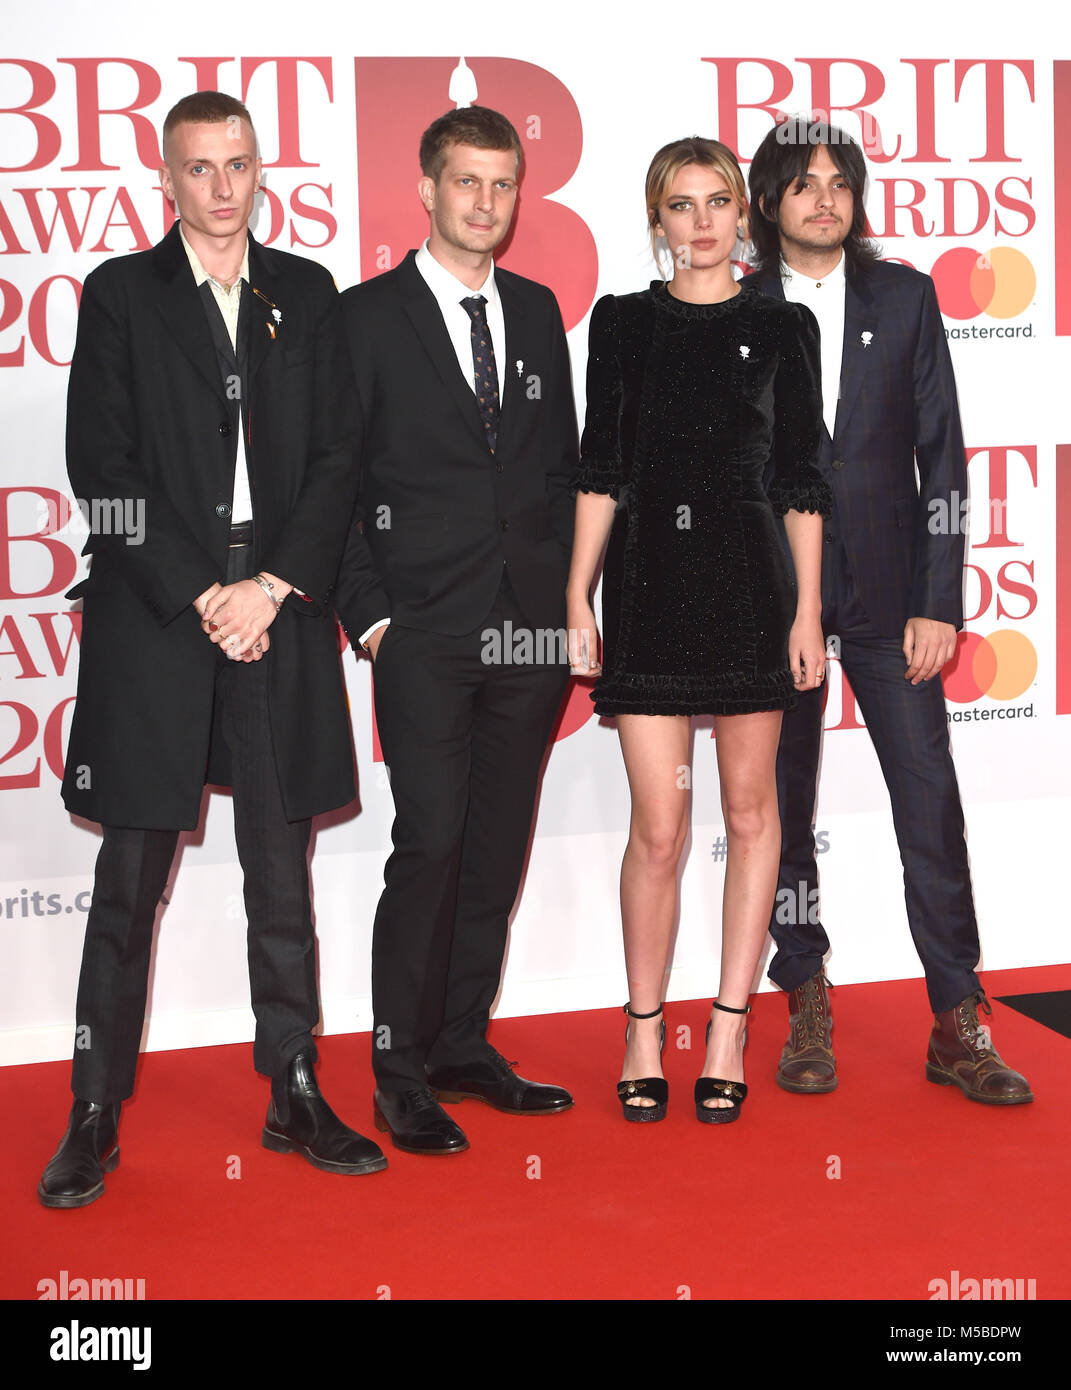 Photo Must Be Credited ©Alpha Press 079965 21/02/2018 Wolf Alice, Ellie Rowsell, Joel Amey, Joff Oddie and Theo Ellis The Brit Awards 2018 at The O2 Arena London Stock Photo